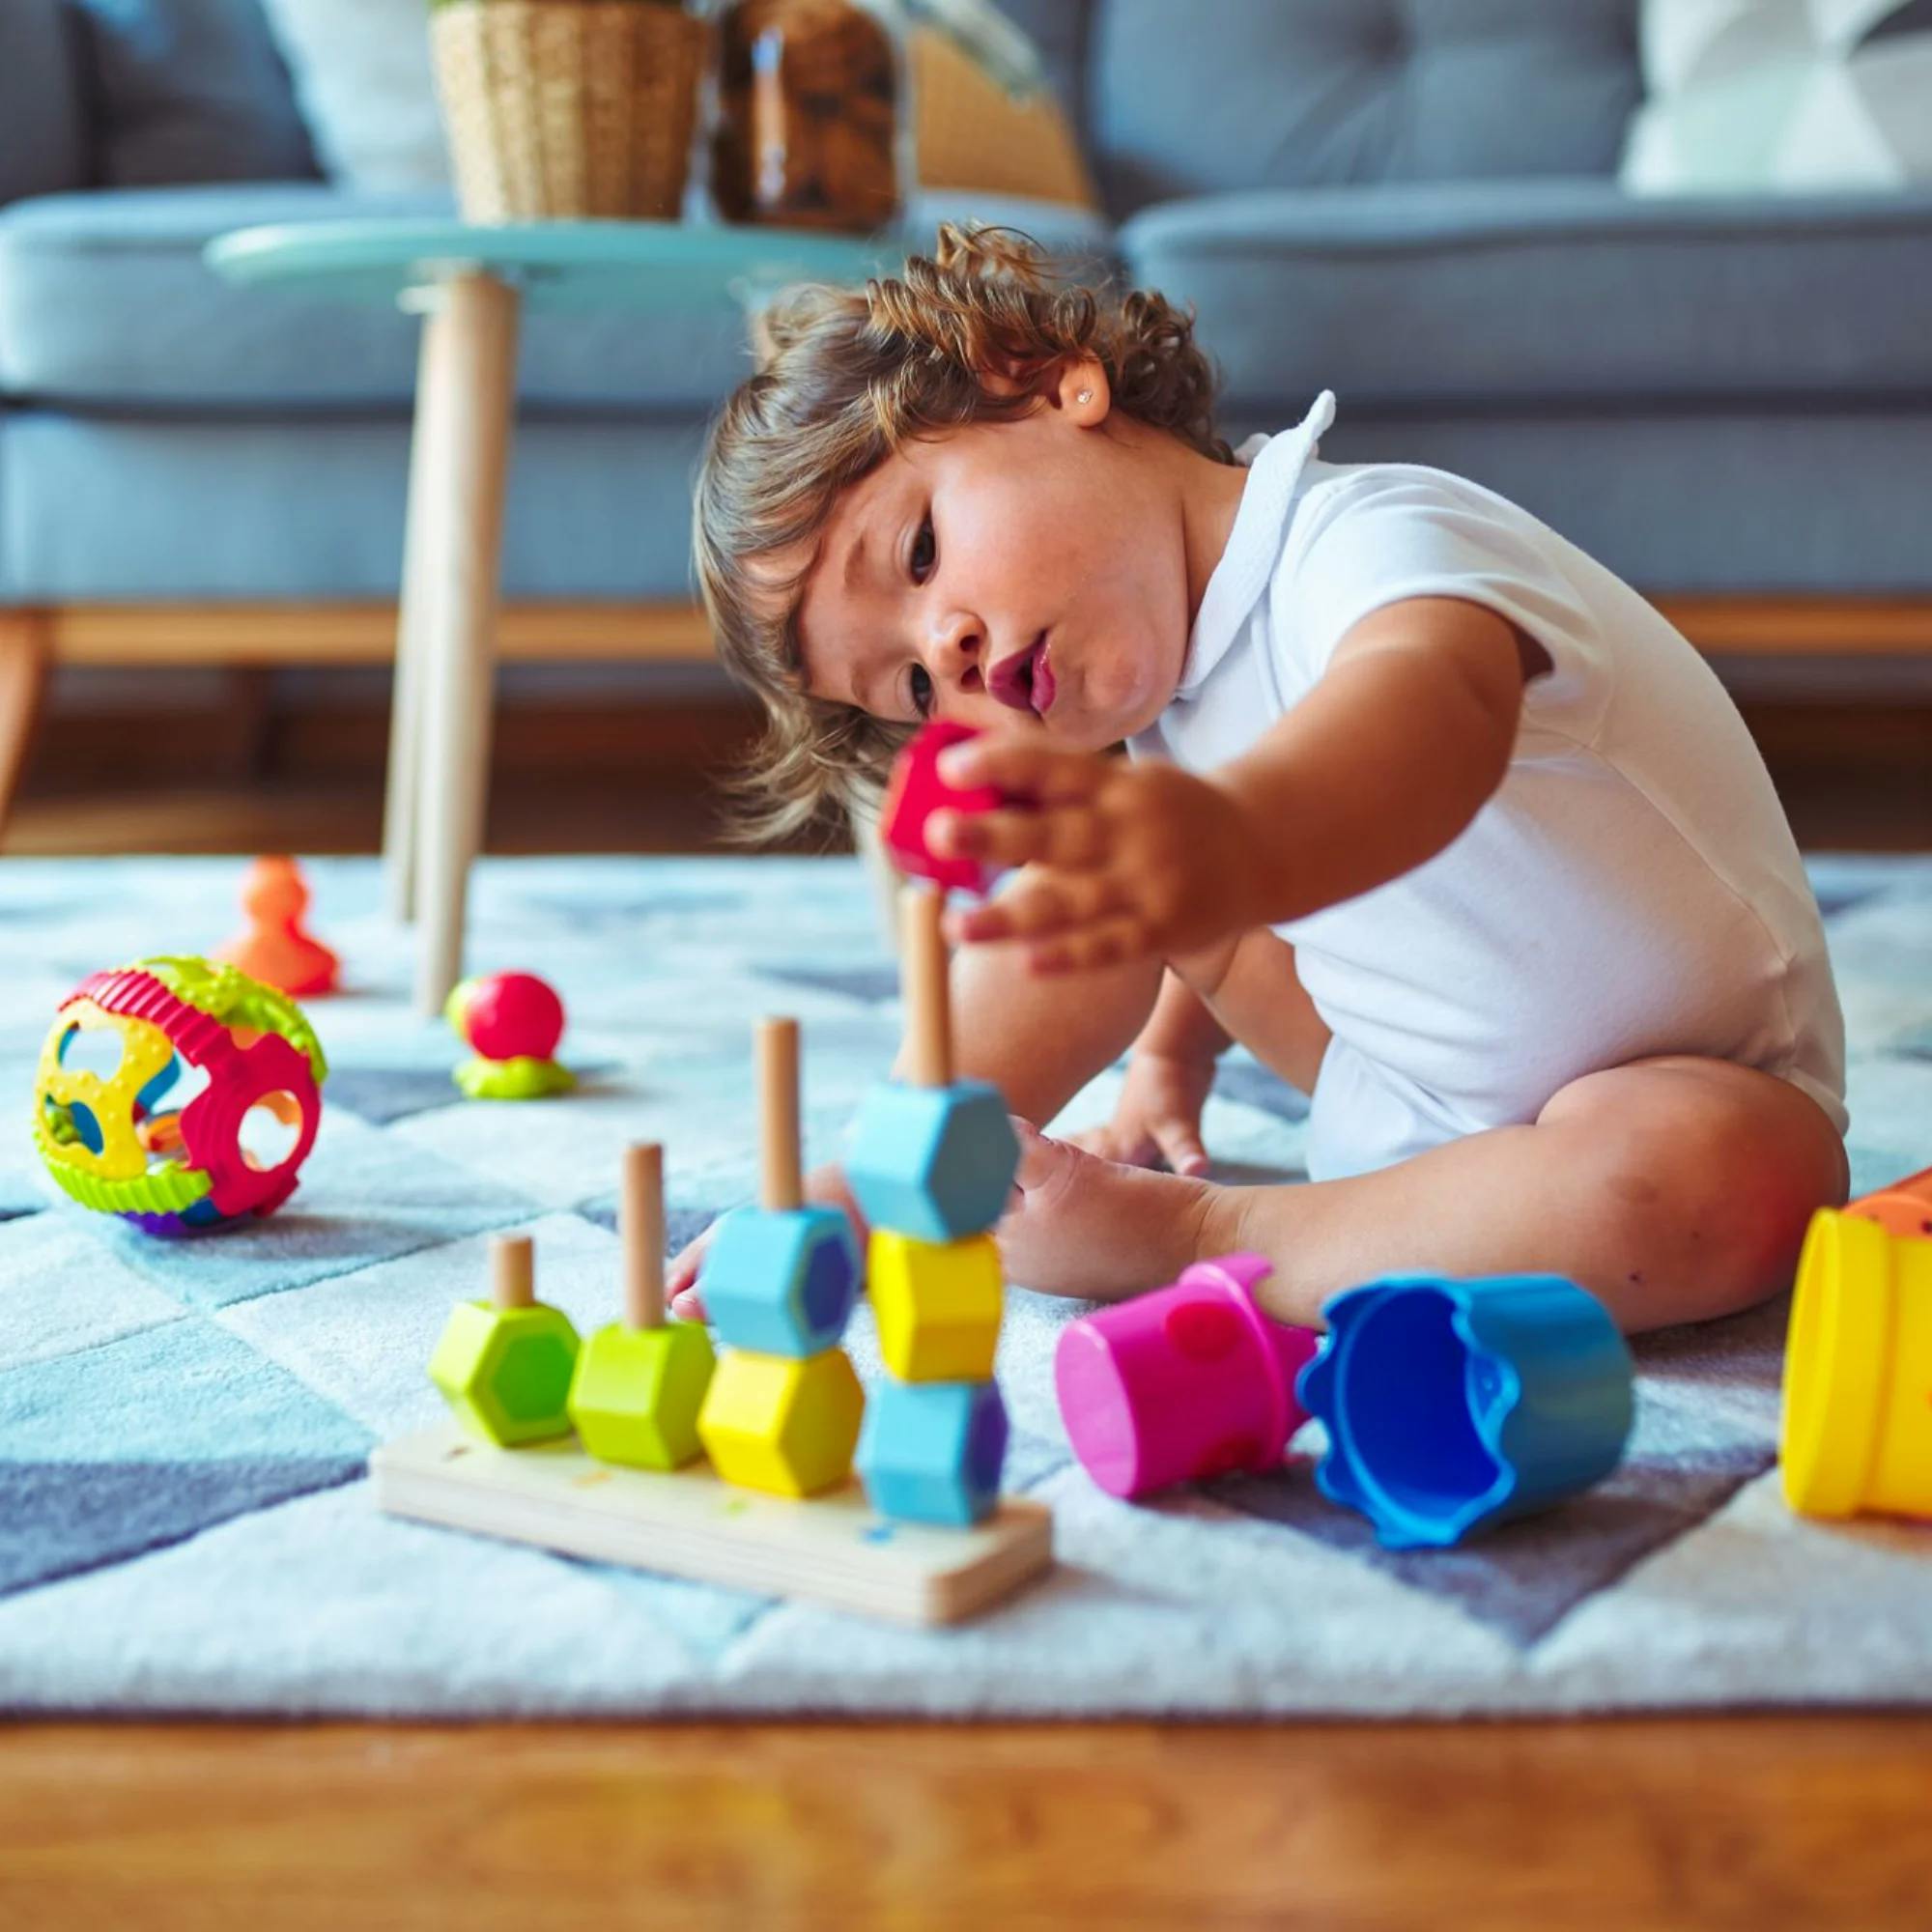 4 Strategies to Help Your Child Play Independently - Baby Chick